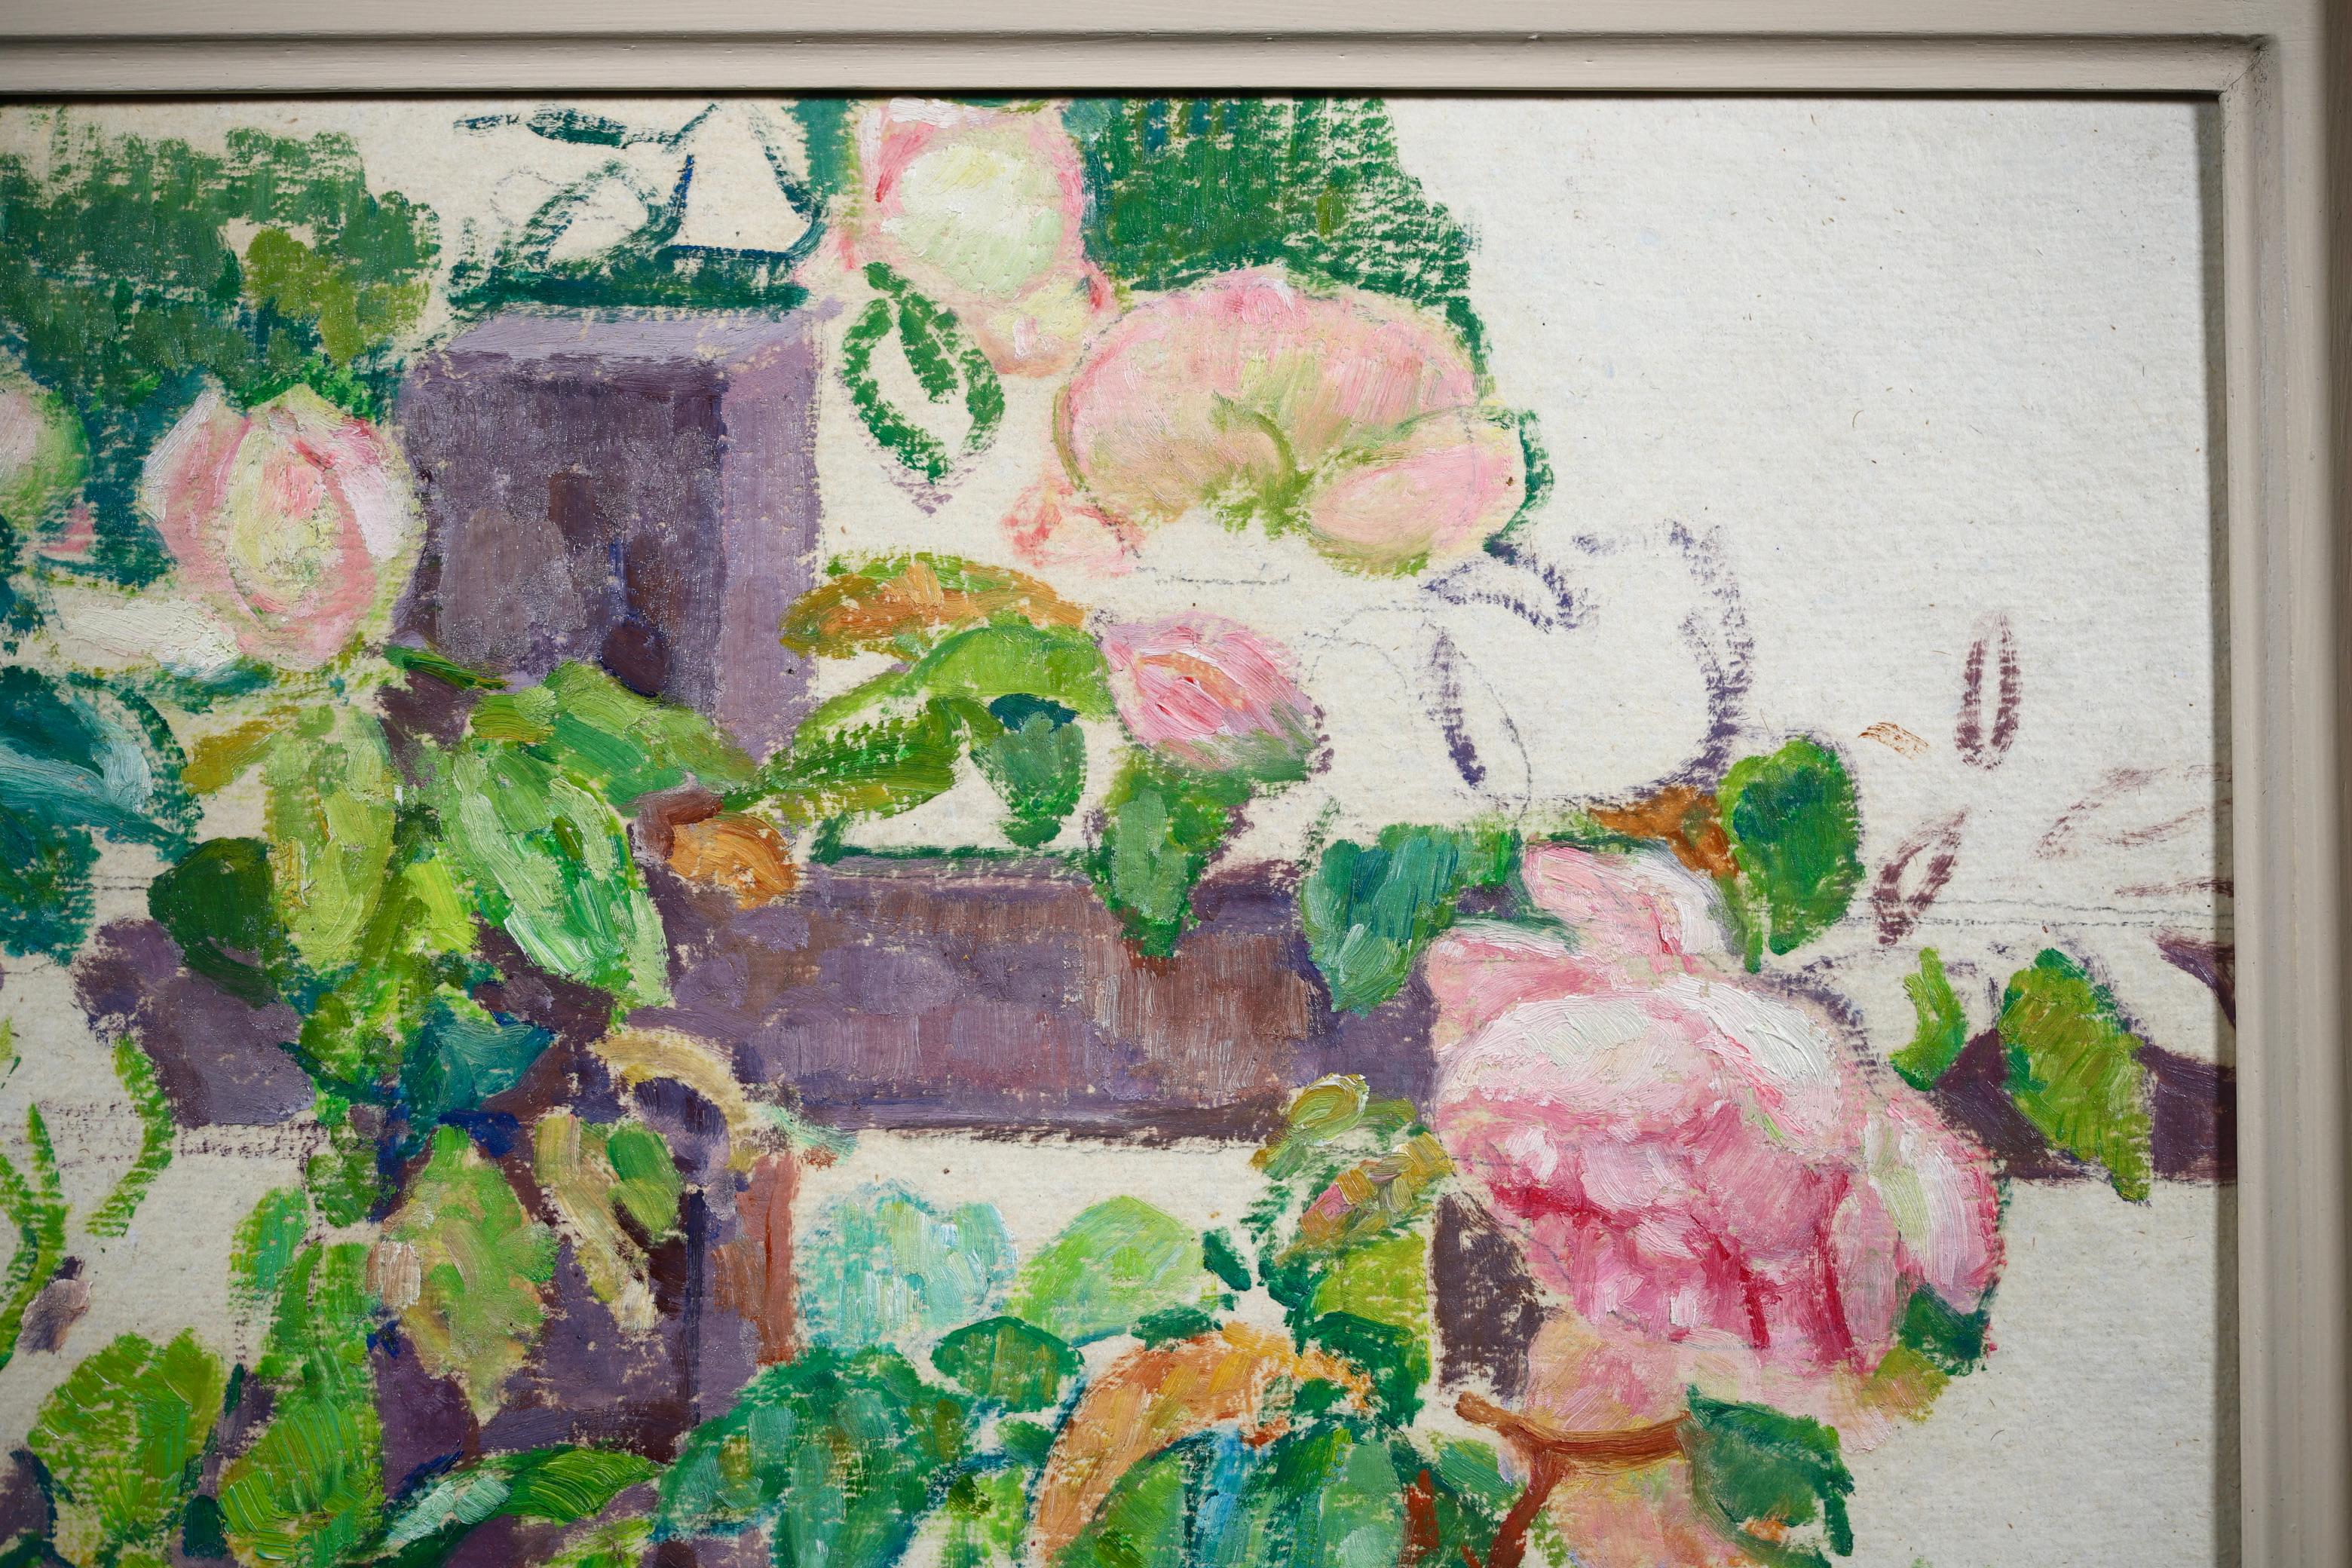 A wonderful oil on paper laid on canvas circa 1905 by French neo-impressionist painter Theo Van Rysselberghe depicting a climbing rose - the pink of the flowers contrasting against the green and yellow of the leaves. 

Signature:
Signed lower